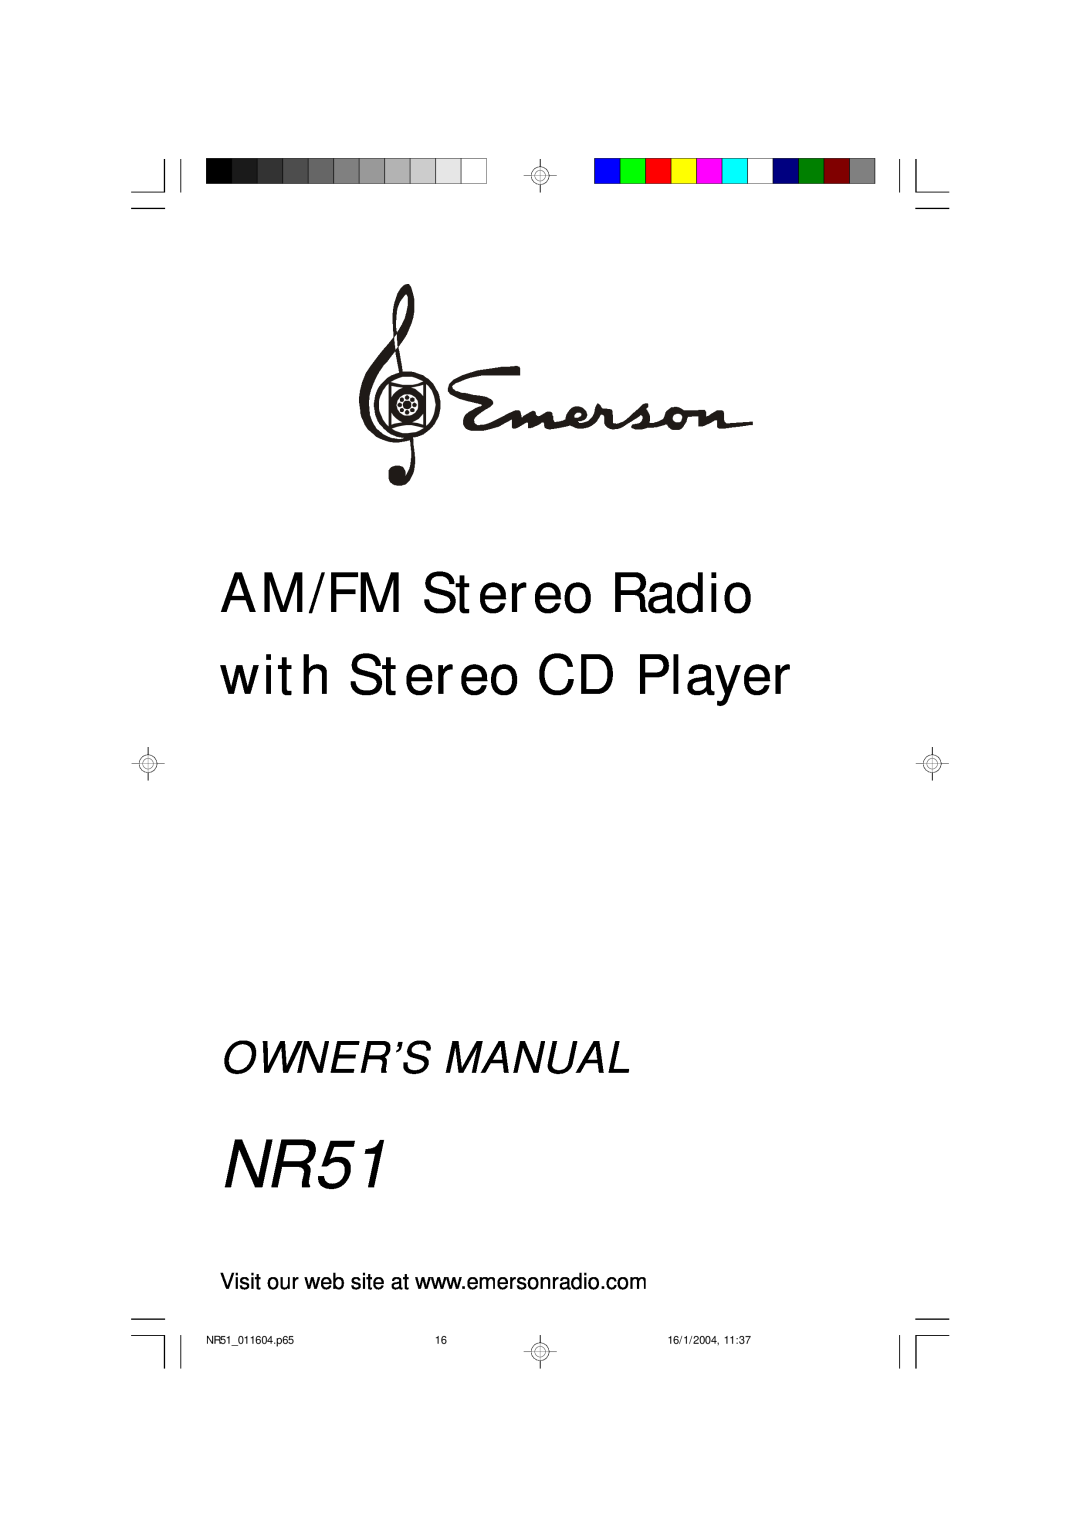 Emerson owner manual AM/FM Stereo Radio with Stereo CD Player, NR51 011604.p65, 16/1/2004 